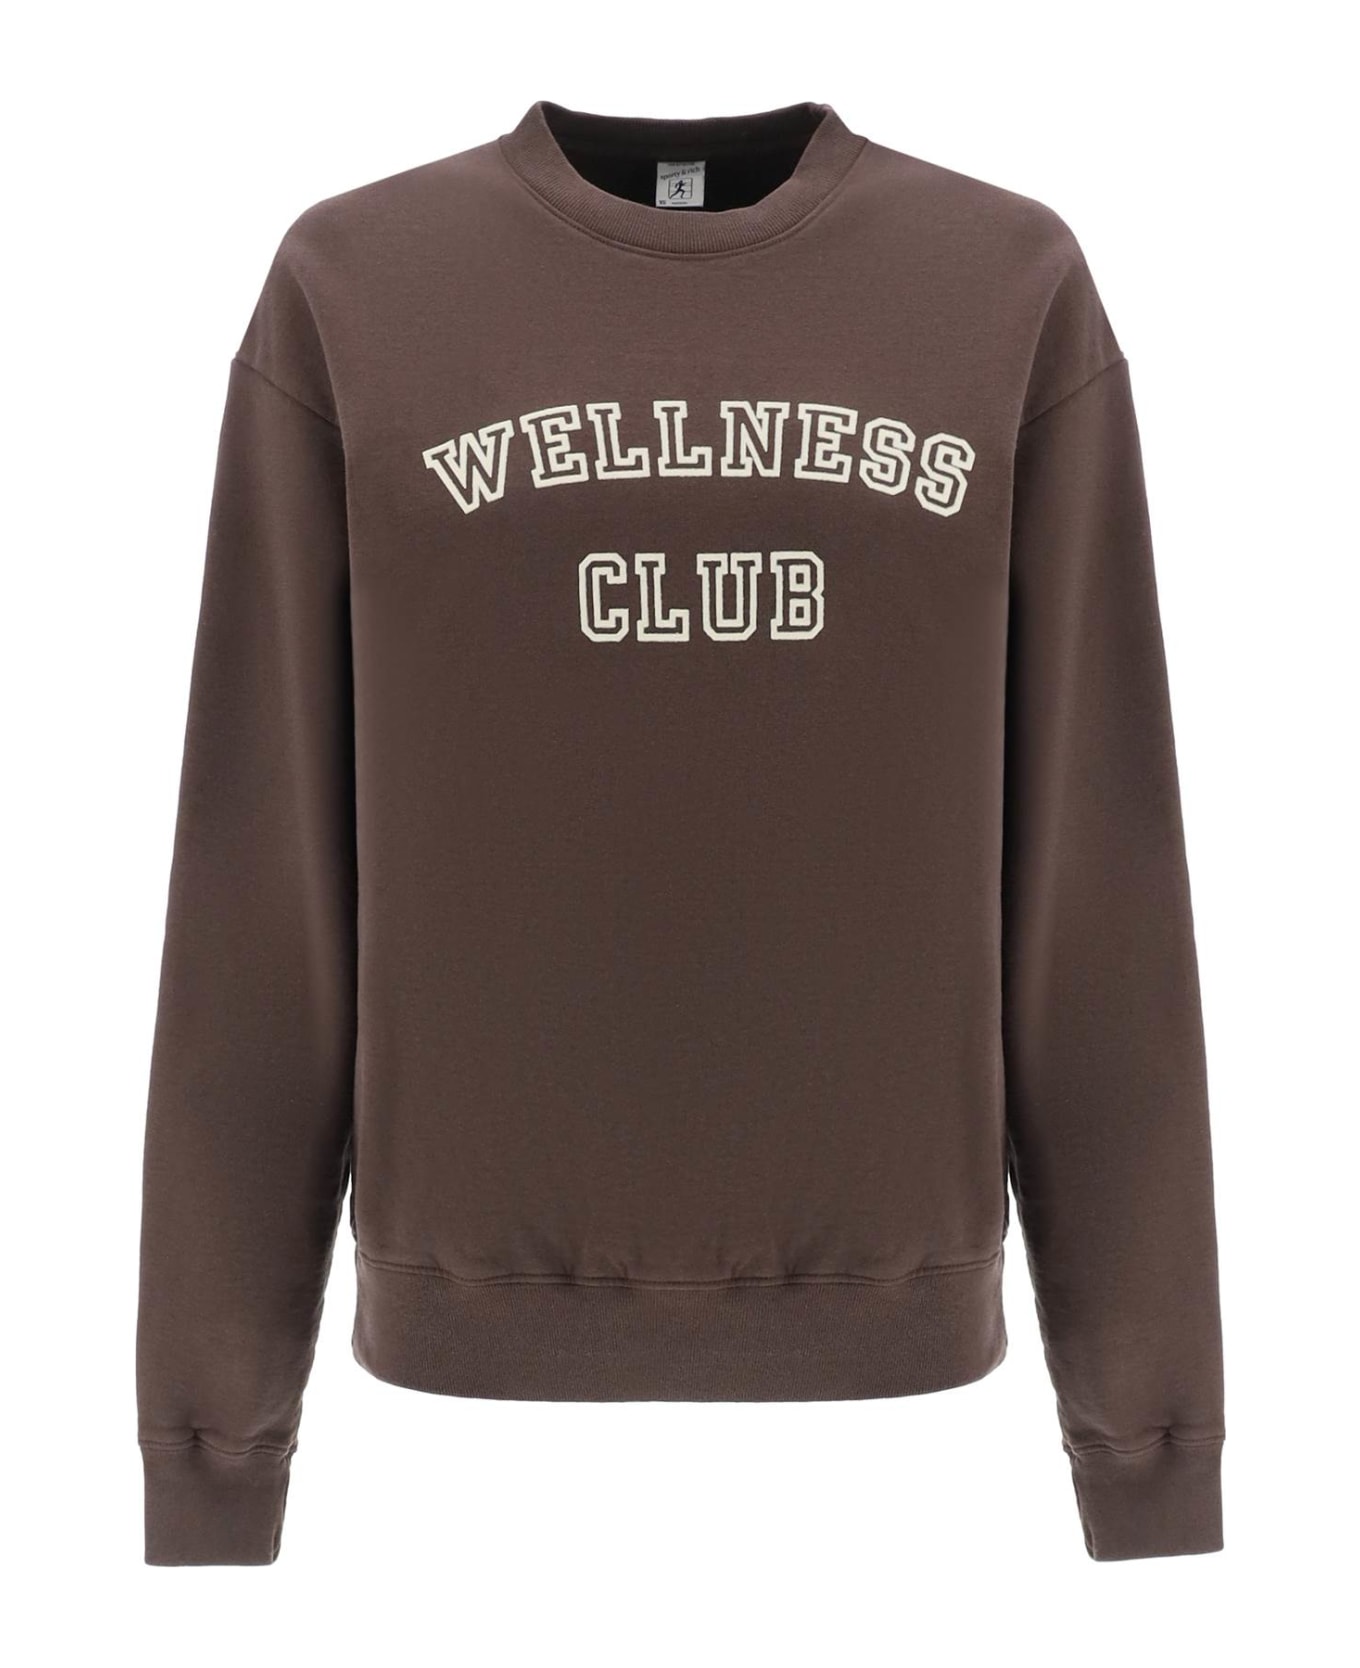 Sporty & Rich Crew-neck Sweatshirt With Lettering Print - CHOCOLATE (Brown)